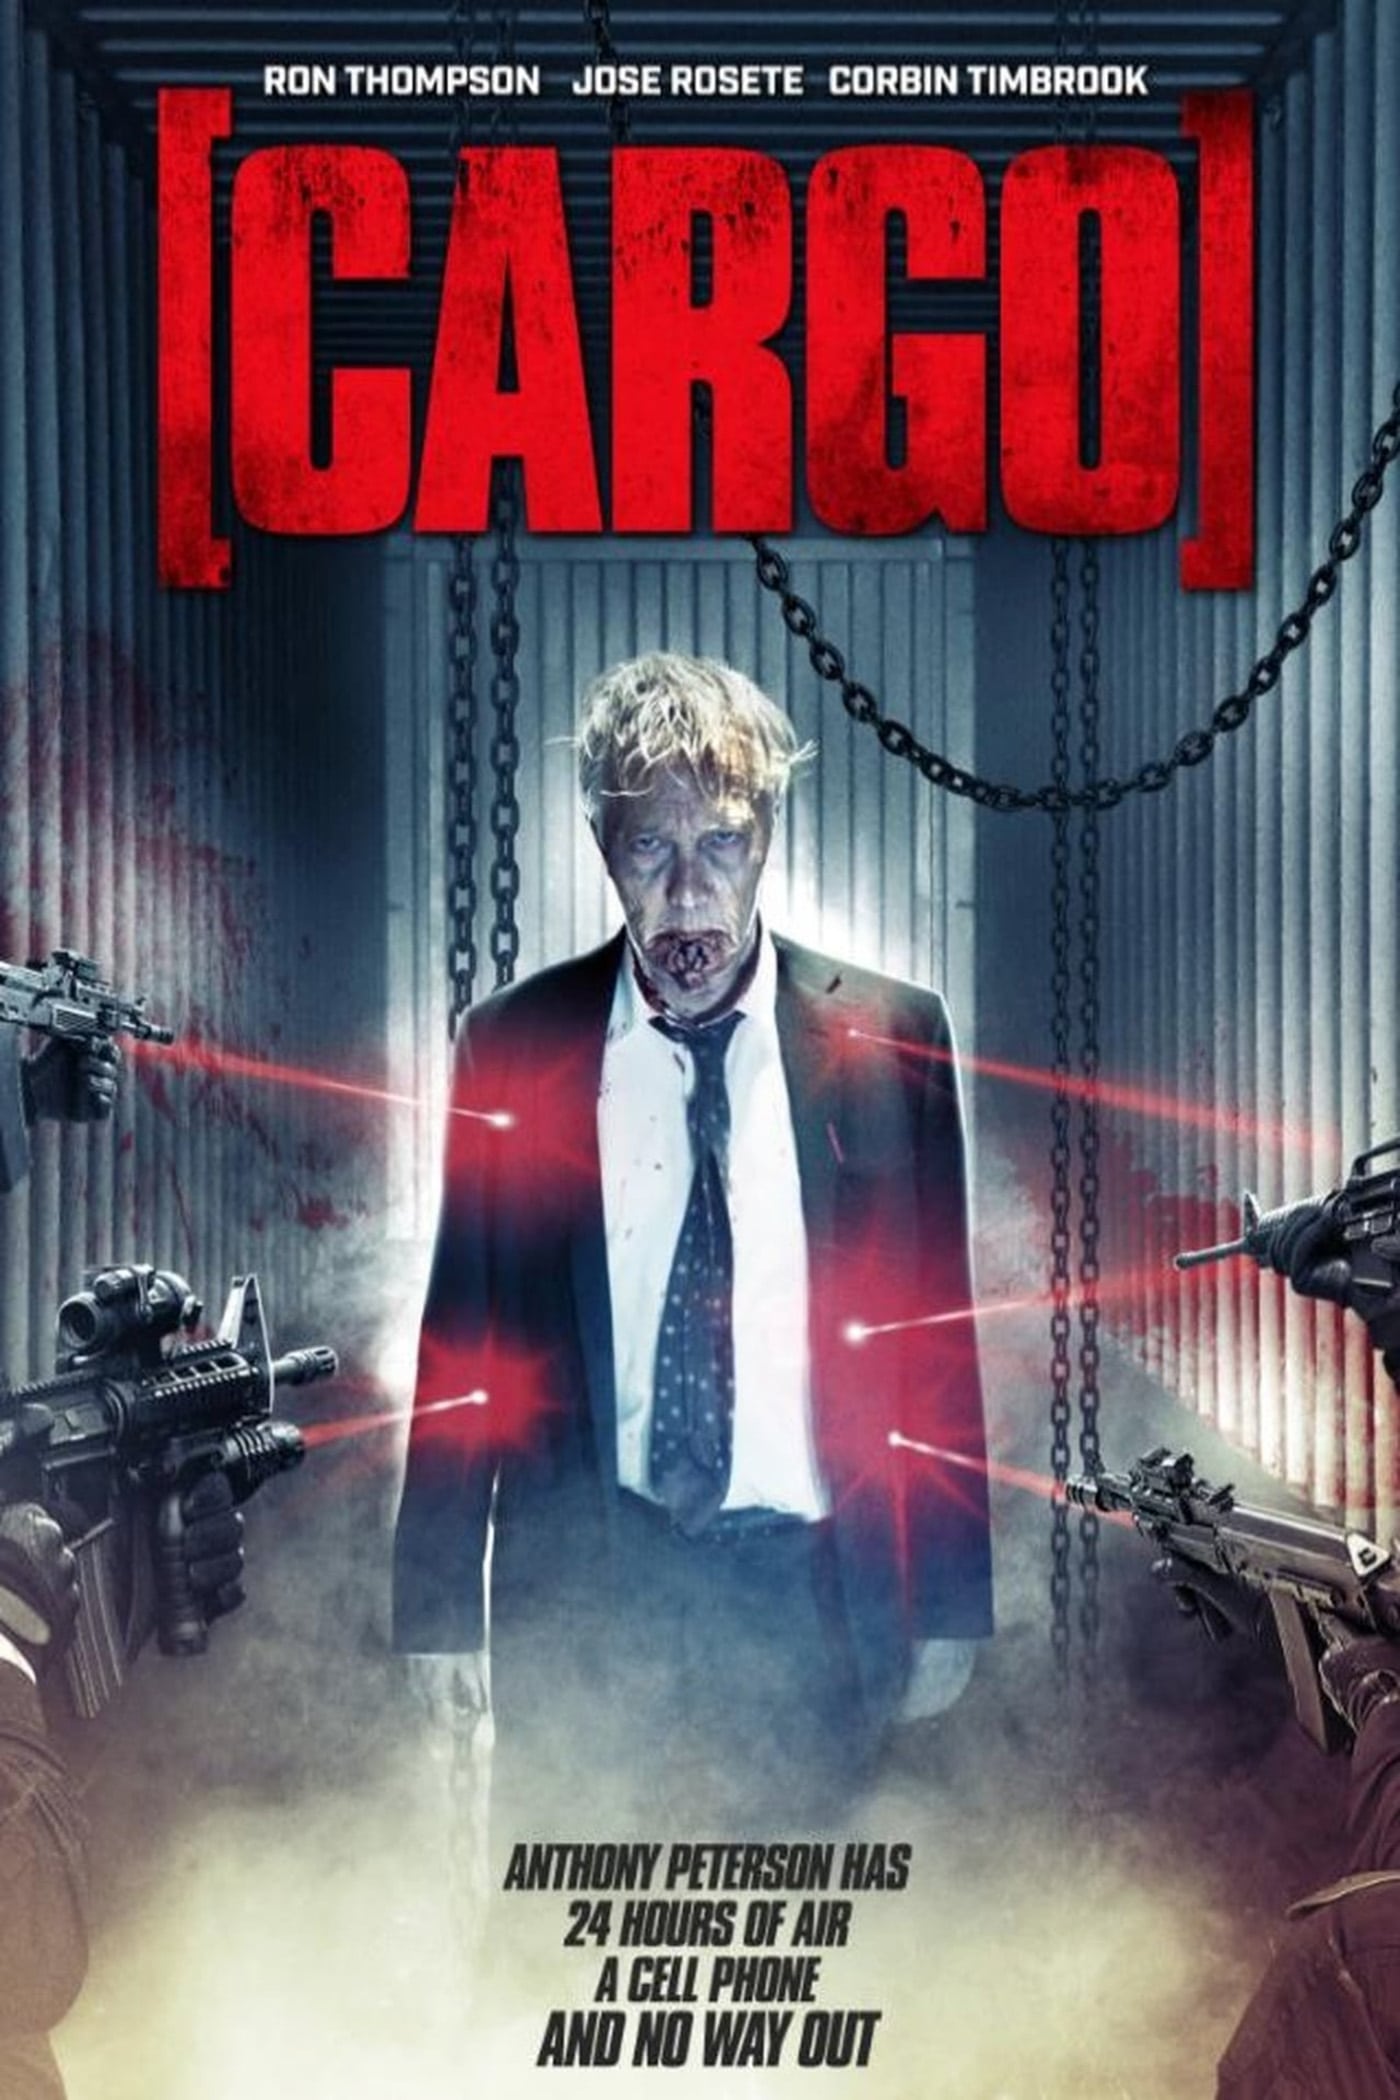 Poster for the movie "[Cargo]"